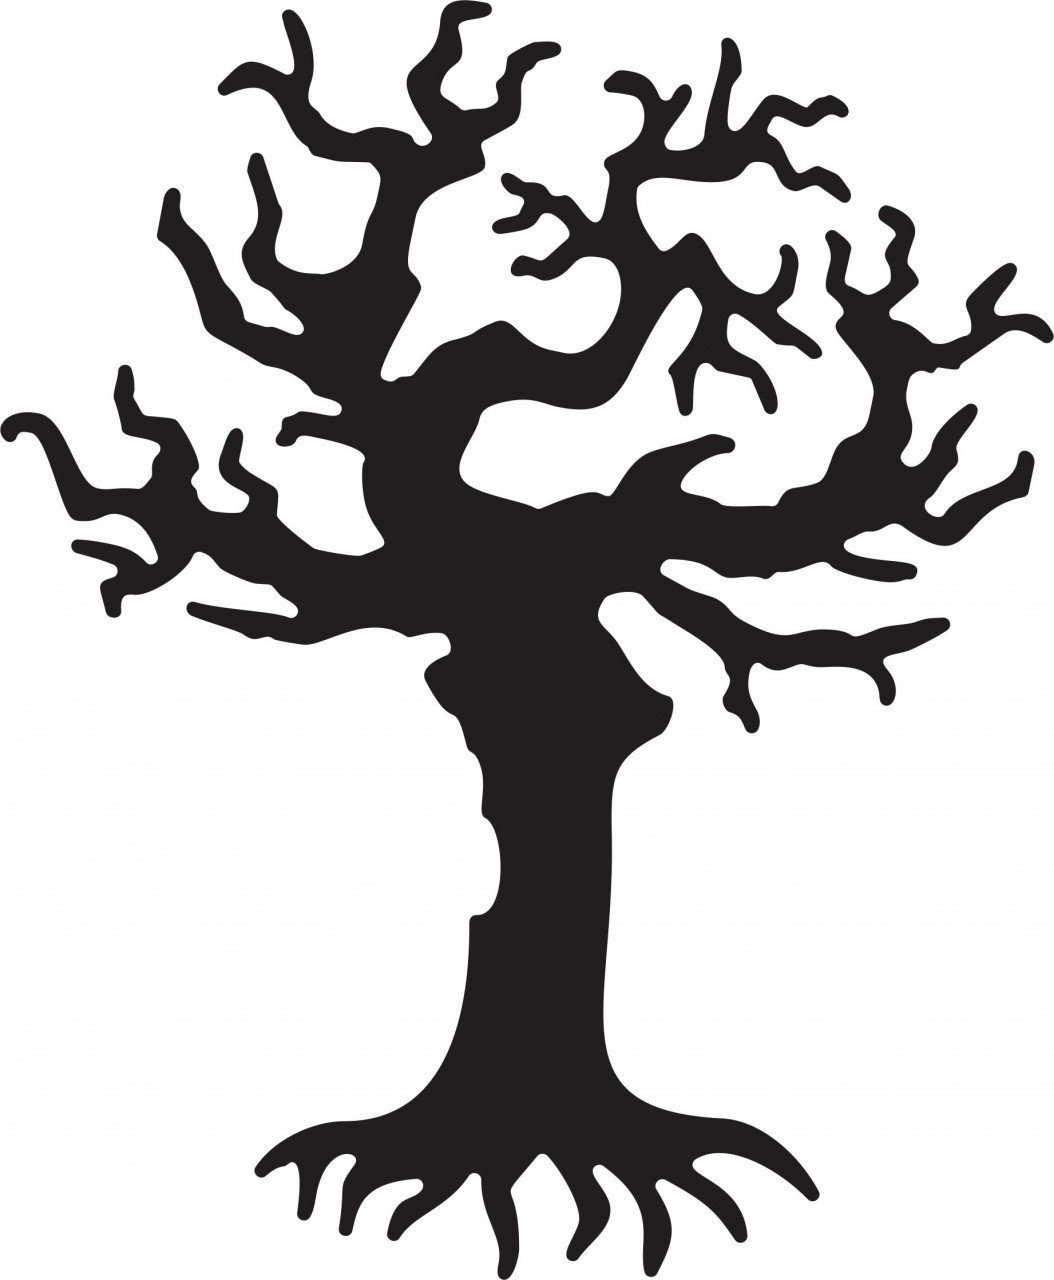 Scary Trees Pictures - ClipArt Best